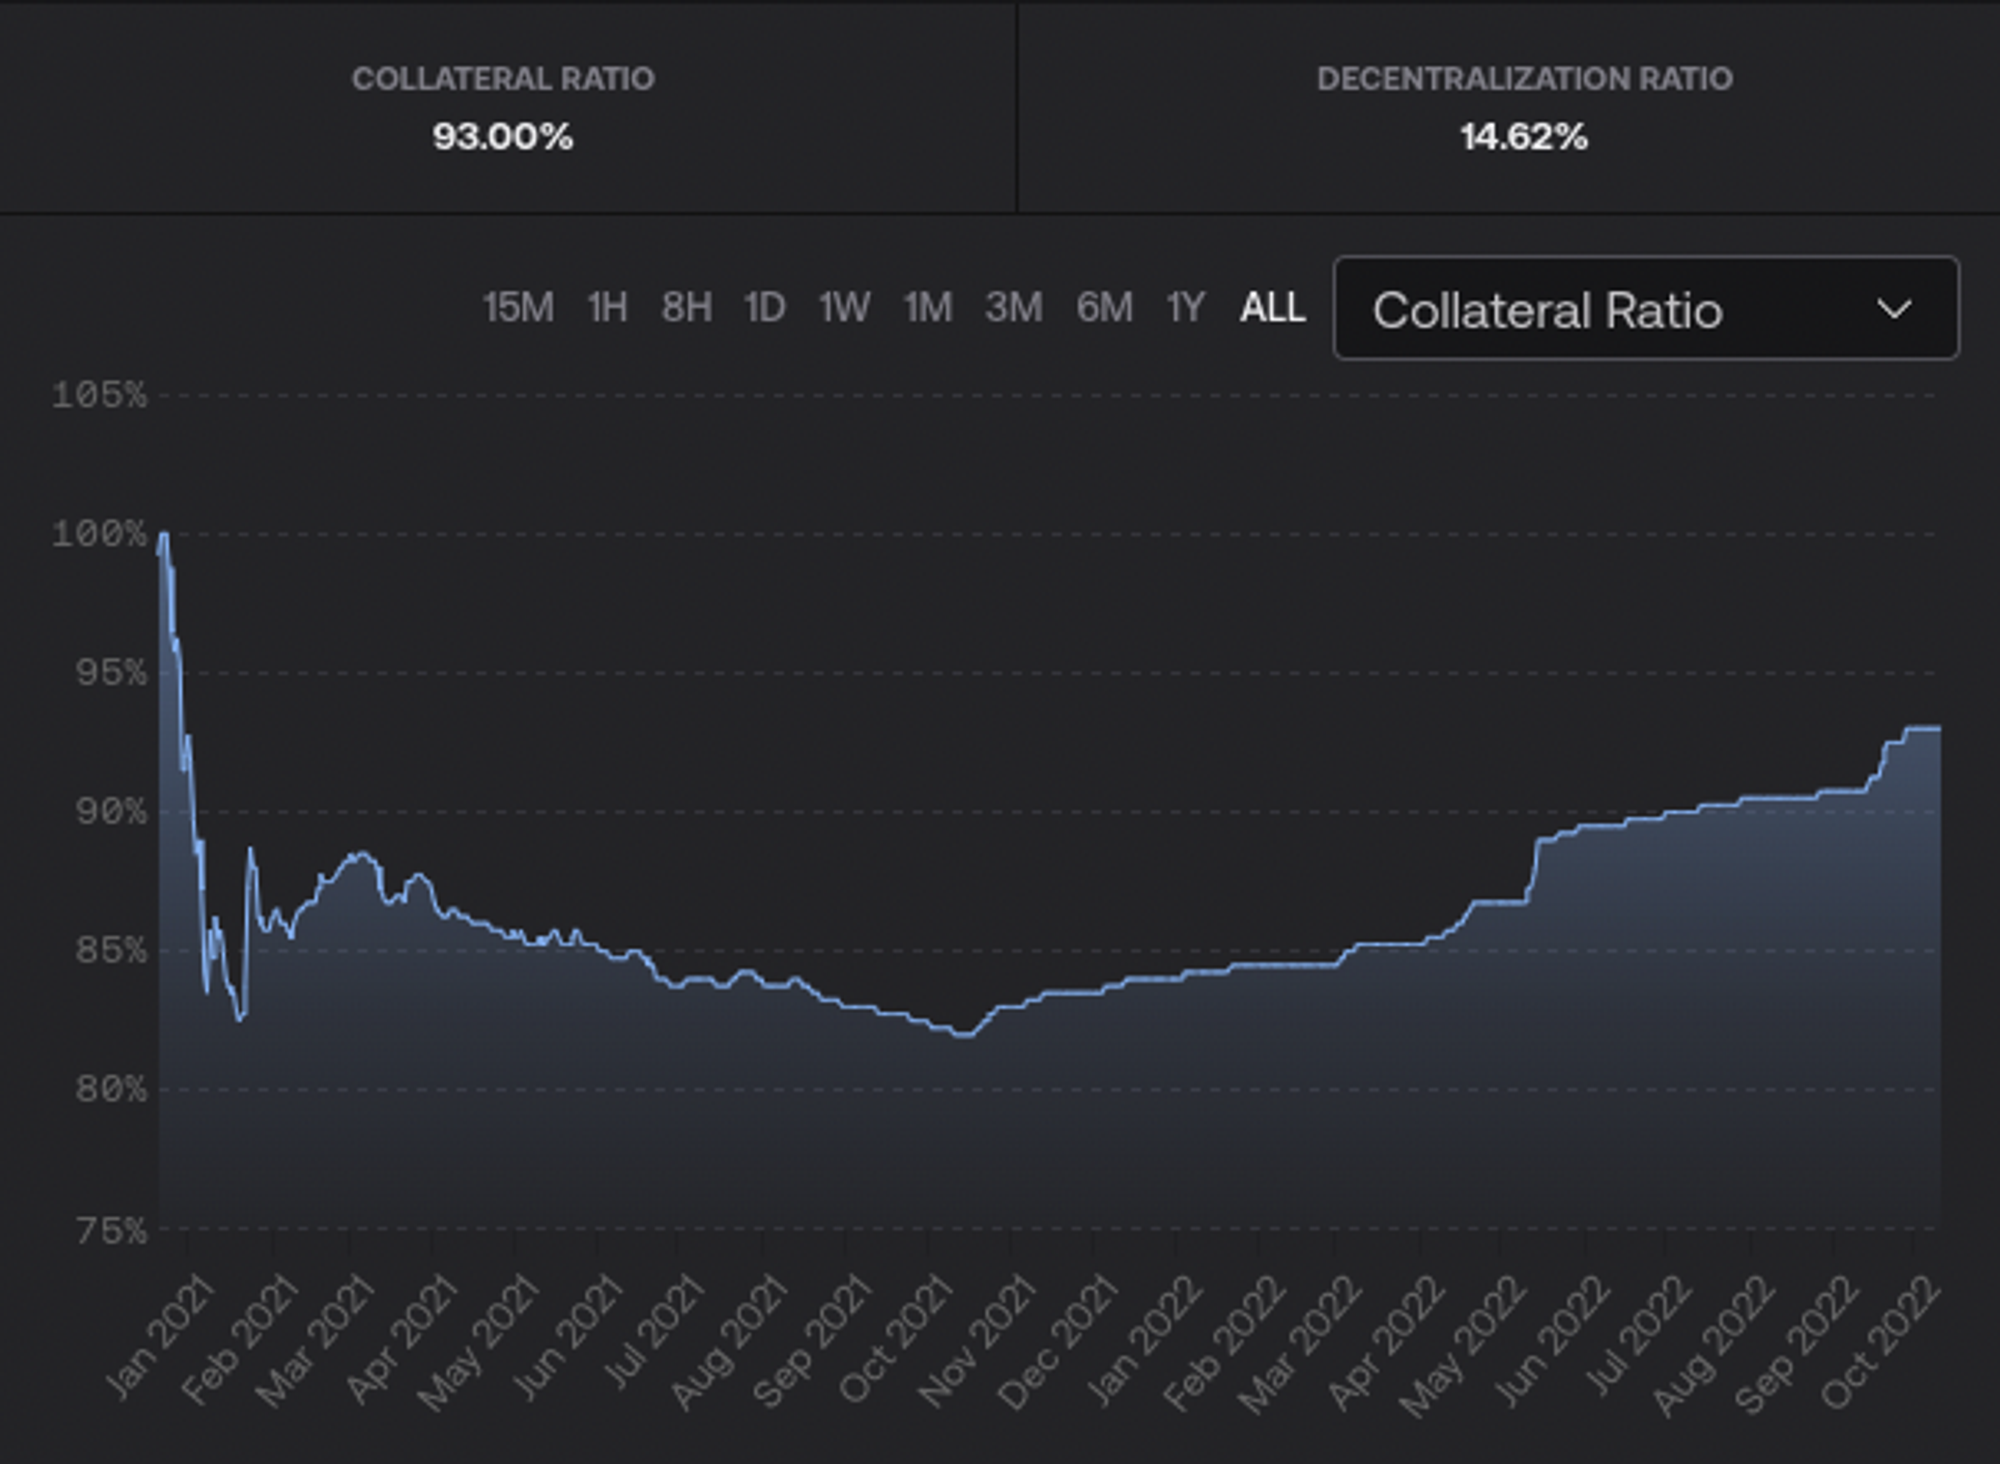 Frax Collateral Ratio since debut. The nadir was ~81%. Note how it sharply increased after the Luna collapse in May 2022. This value is controlled by the protocol team only.